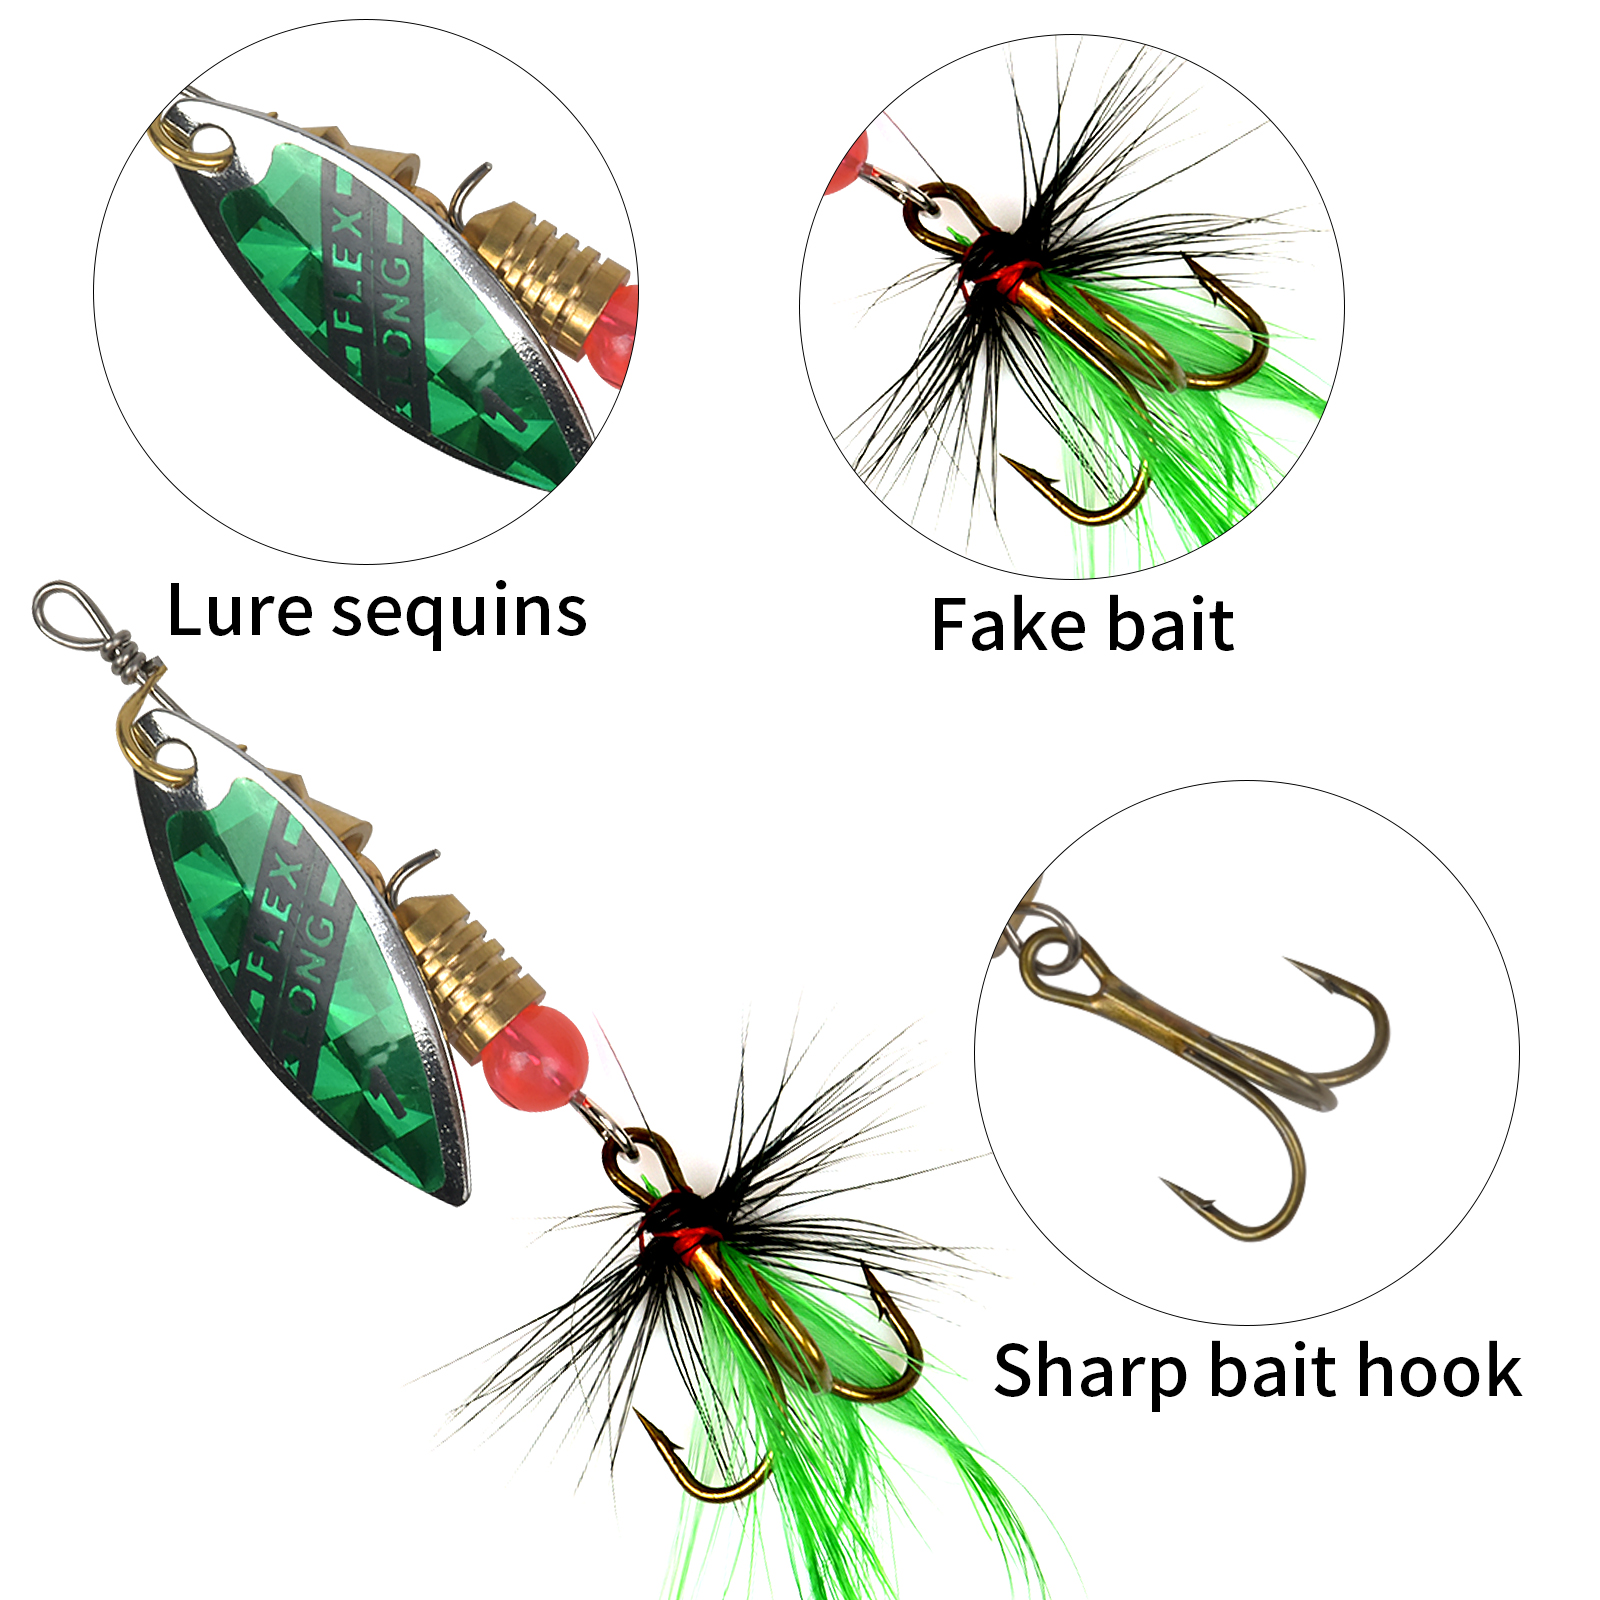  VMSIXVM Trout Lures Rooster Bait Tail Fishing Lures, Brass  Fishing Spinner baits for Bass Trout Pike, Trout Spinnerbaits Trout Fishing  Gear for Freshwater Saltwater, Fishing Gifts for Men : Sports